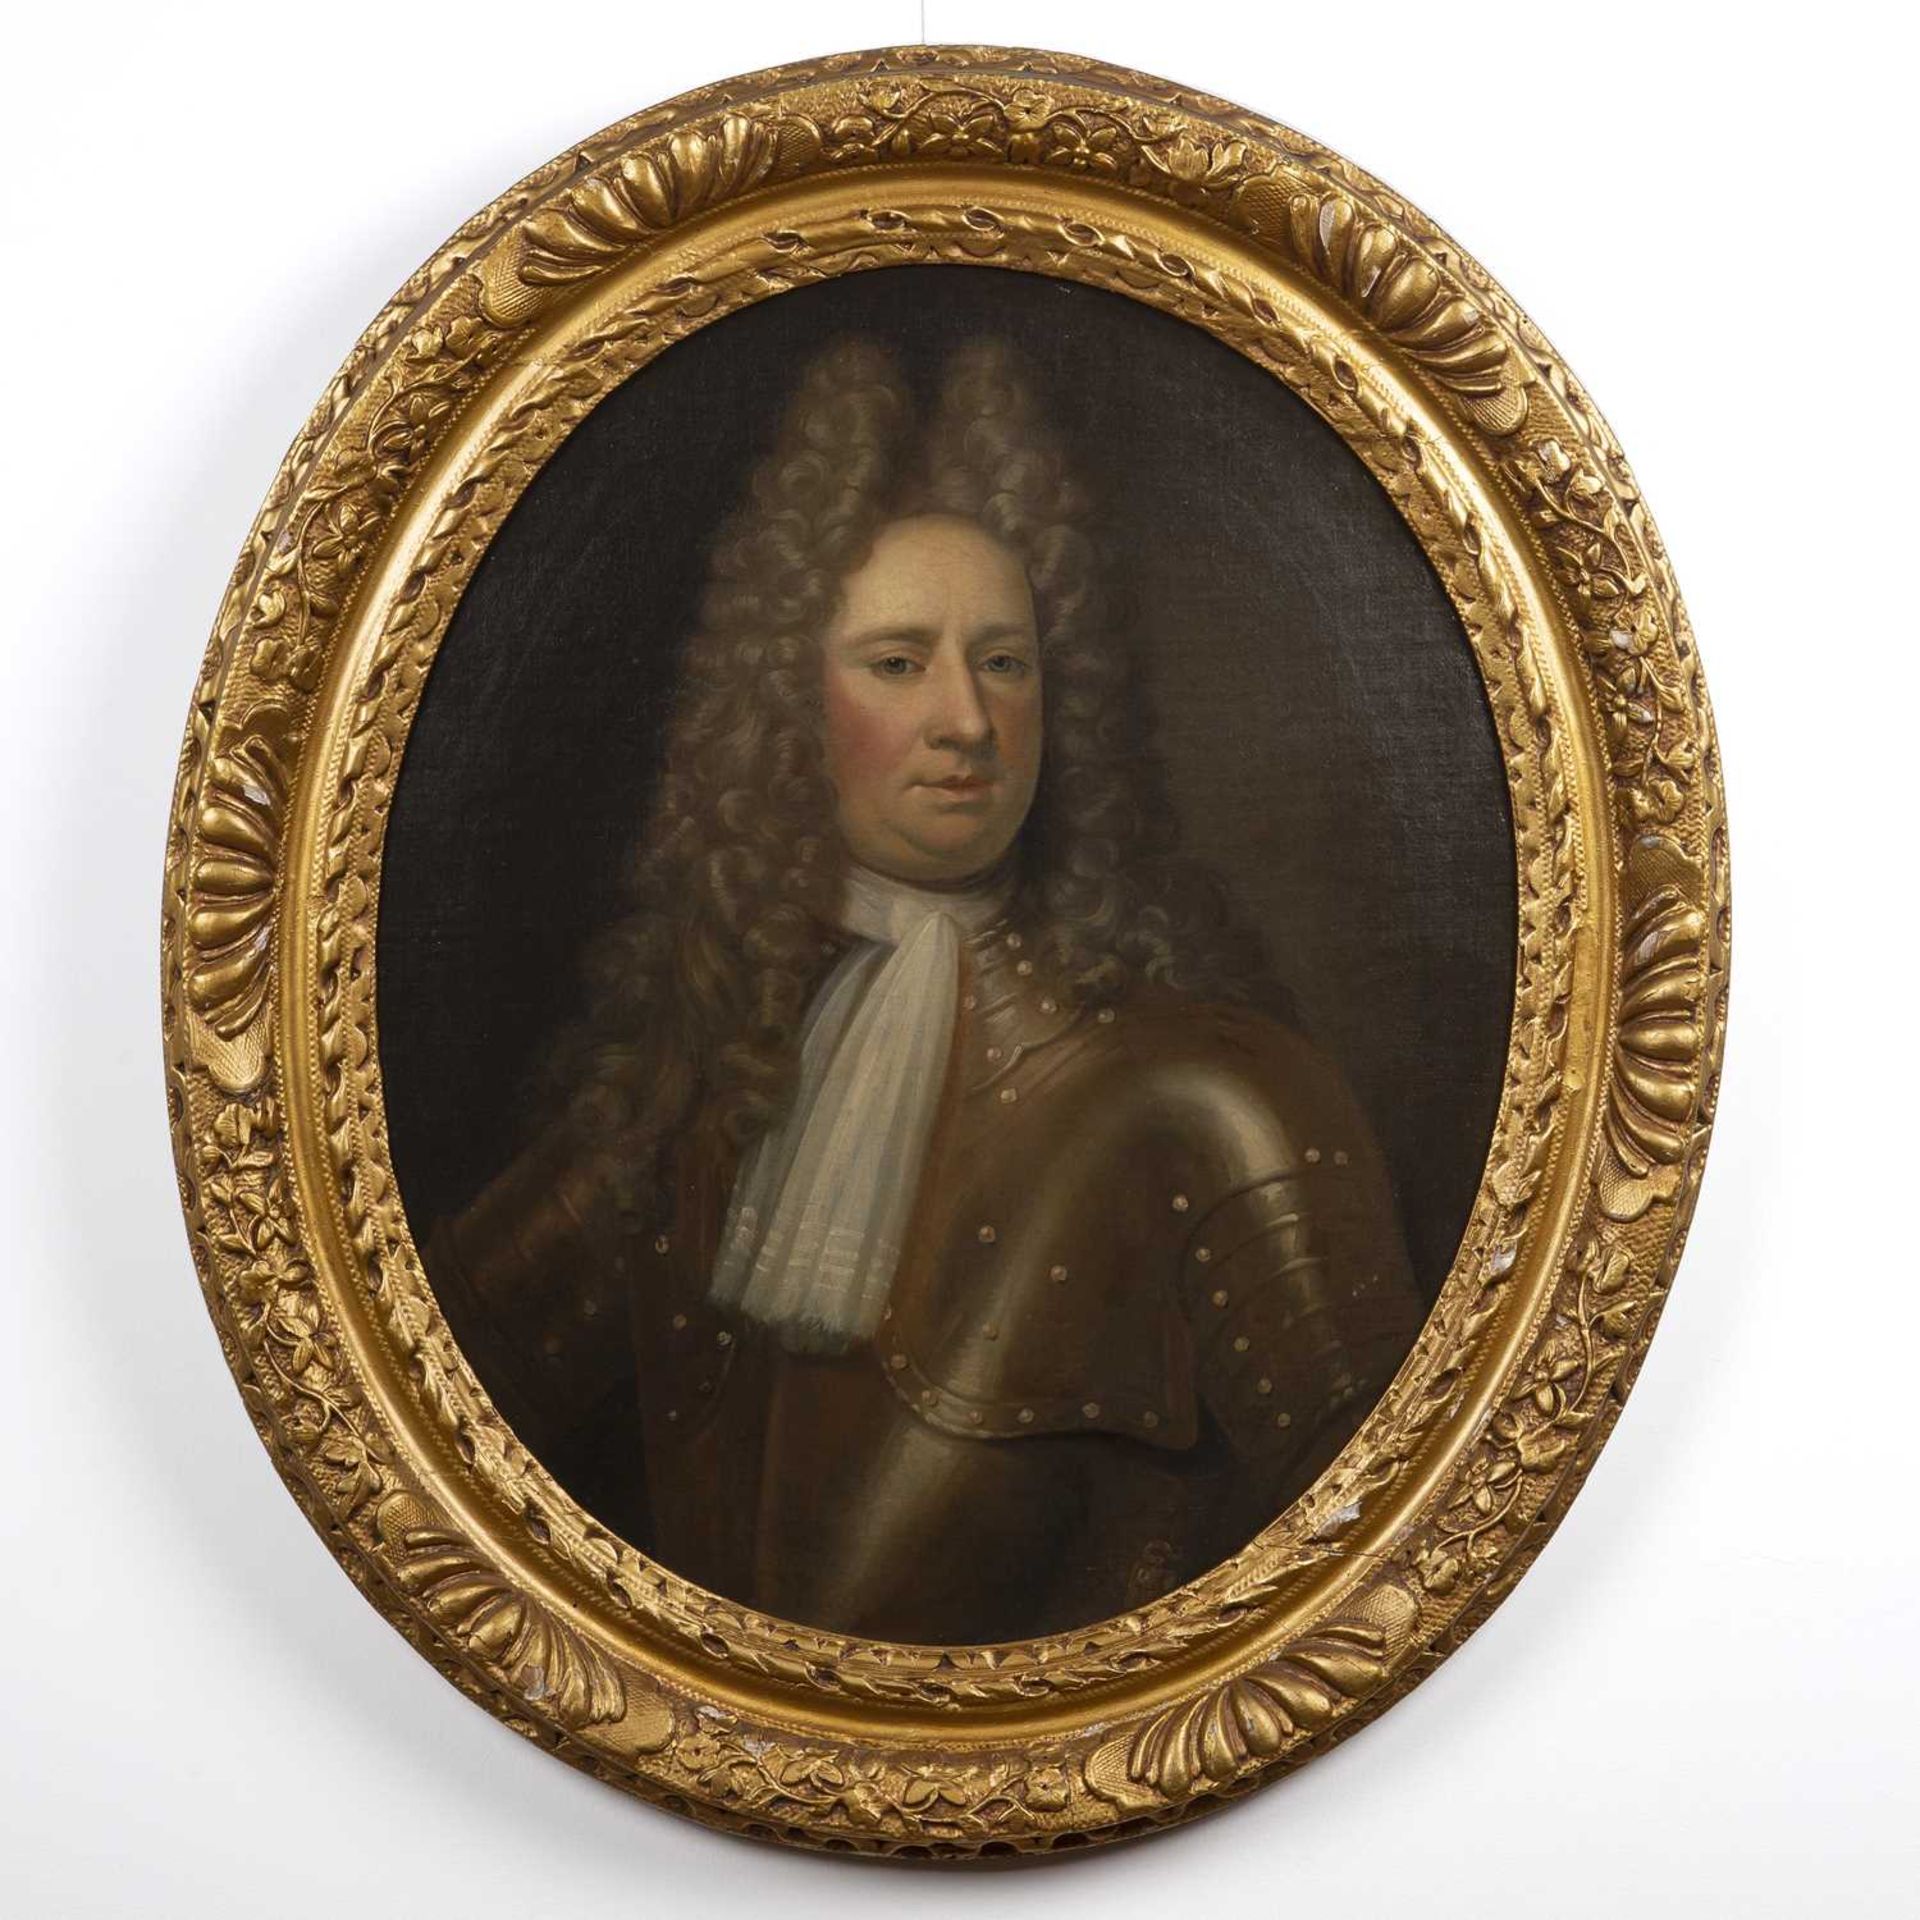 After Godfrey Kneller (1646-1723) Oval portrait of a nobleman wearing armour and a lace neckerchief, - Image 2 of 3